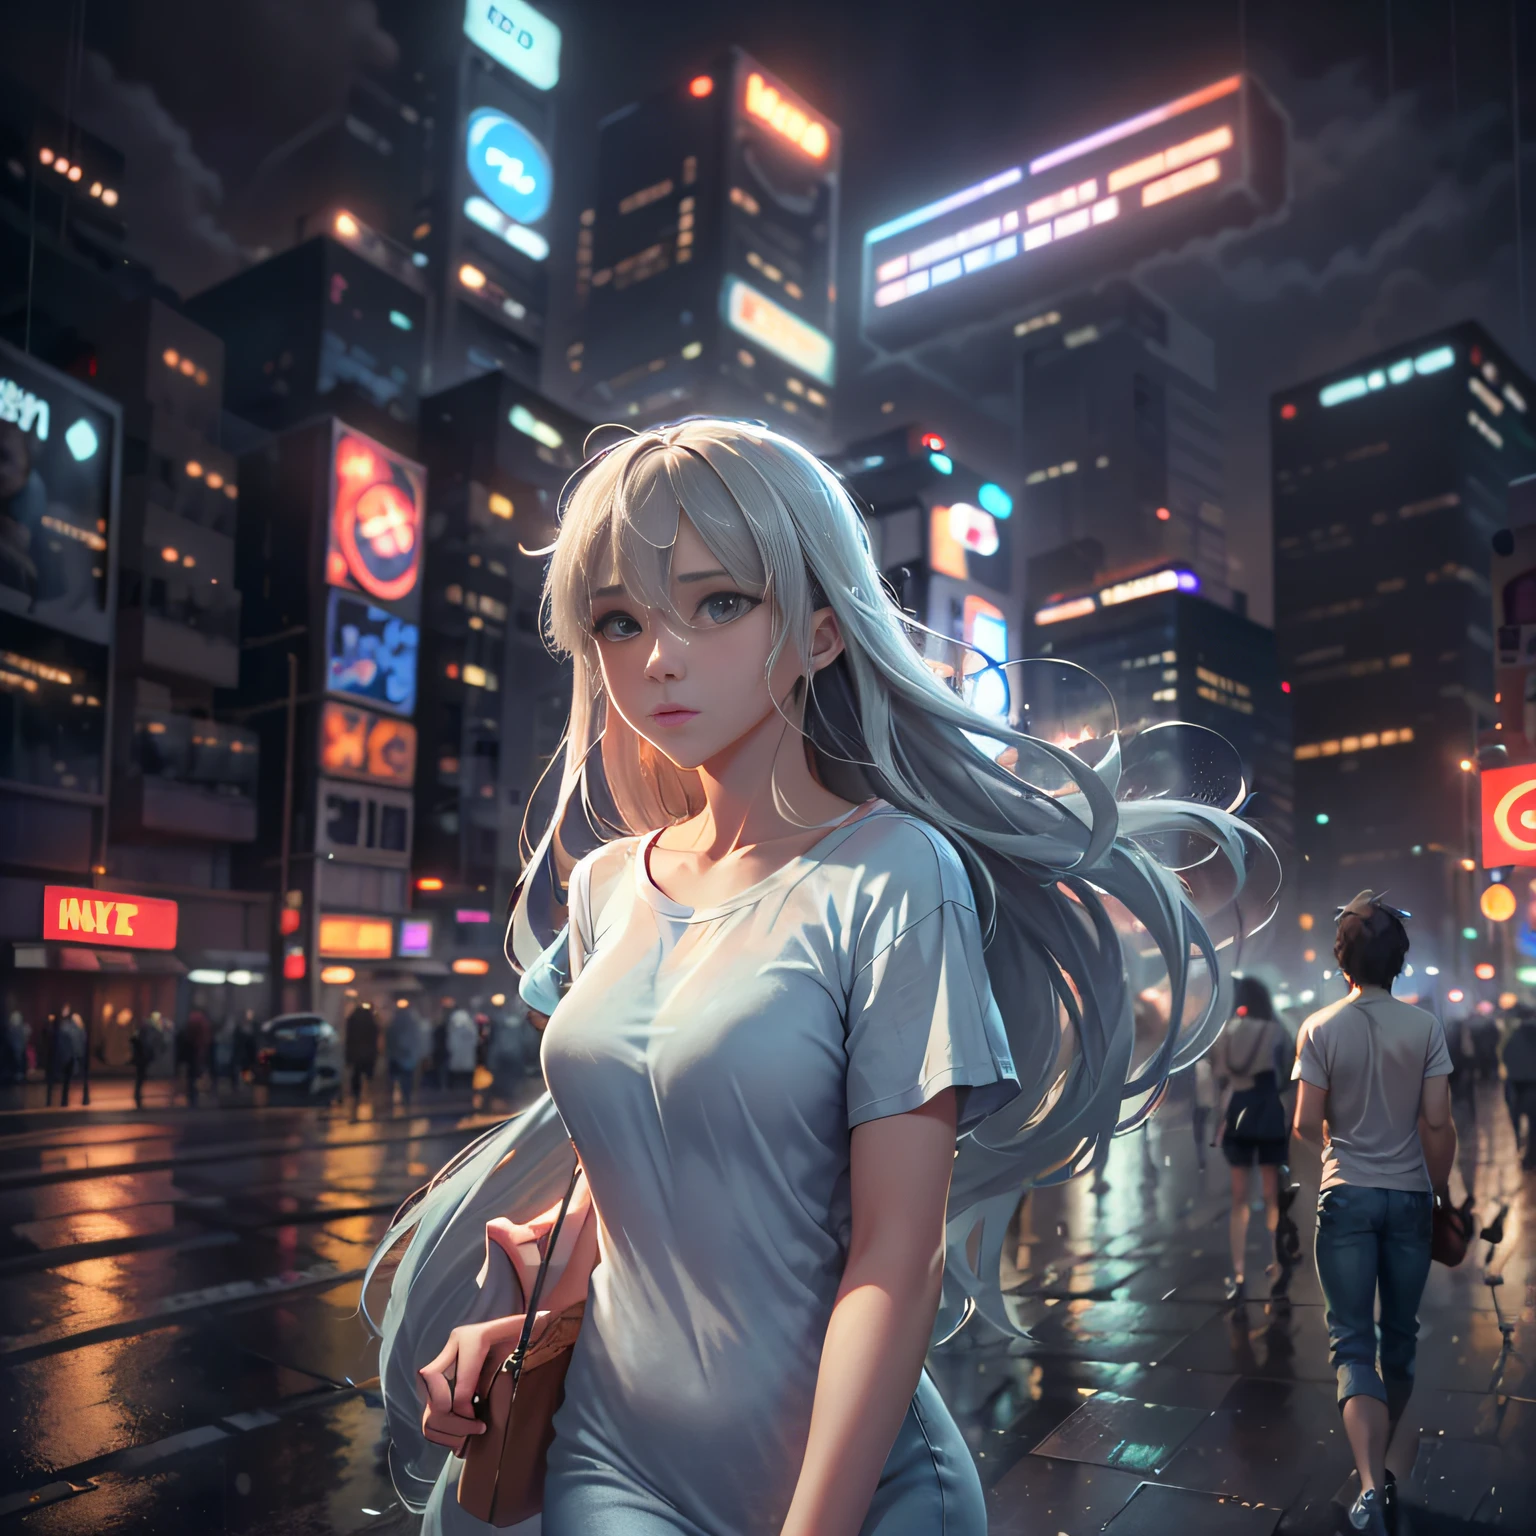 At the crossroads of big cities, on a rainy night, a handsome boy wears a white T-shirt with jeans, and a beautiful girl wears a light blue dress, with long flowing hair and a sweet face. Passing by, surrounded by the hustle and bustle of the cityscape. HD image, 4K